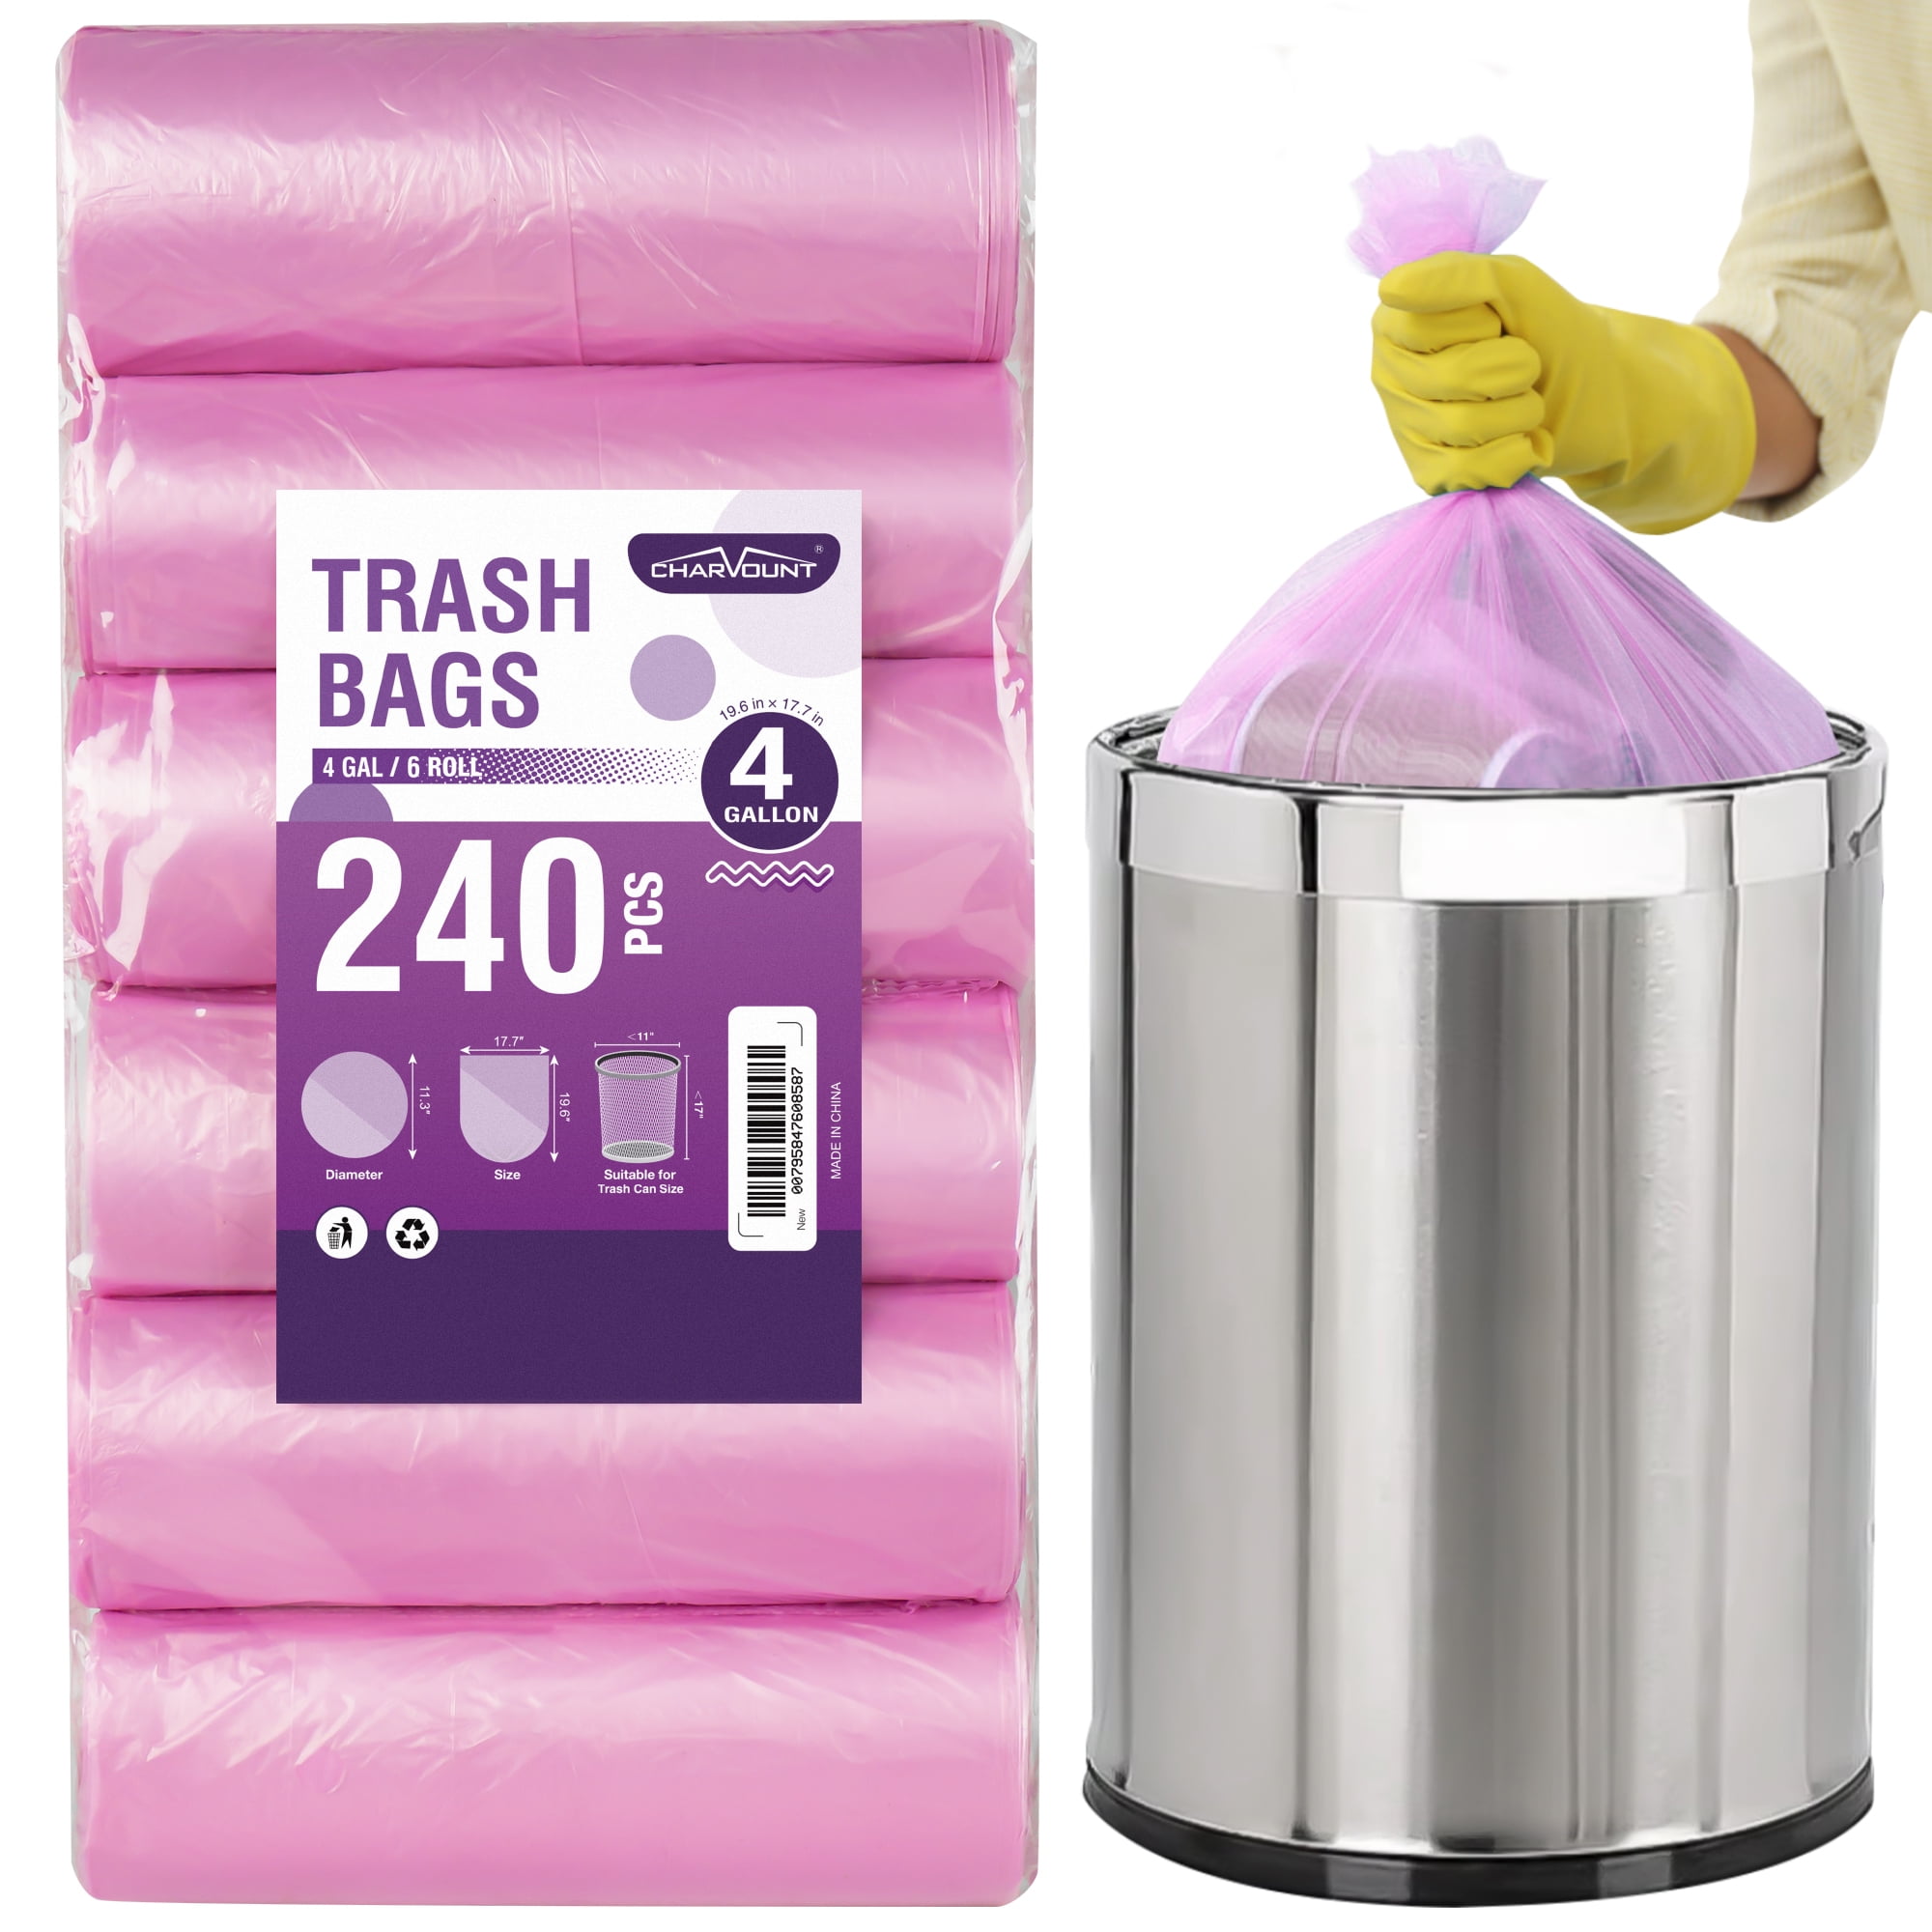 Charmount Small Trash Bags Bathroom, 4 Gallon Garbage Bags for Kitchen  Bedroom, Unscented, 80 Count, Hot Pink